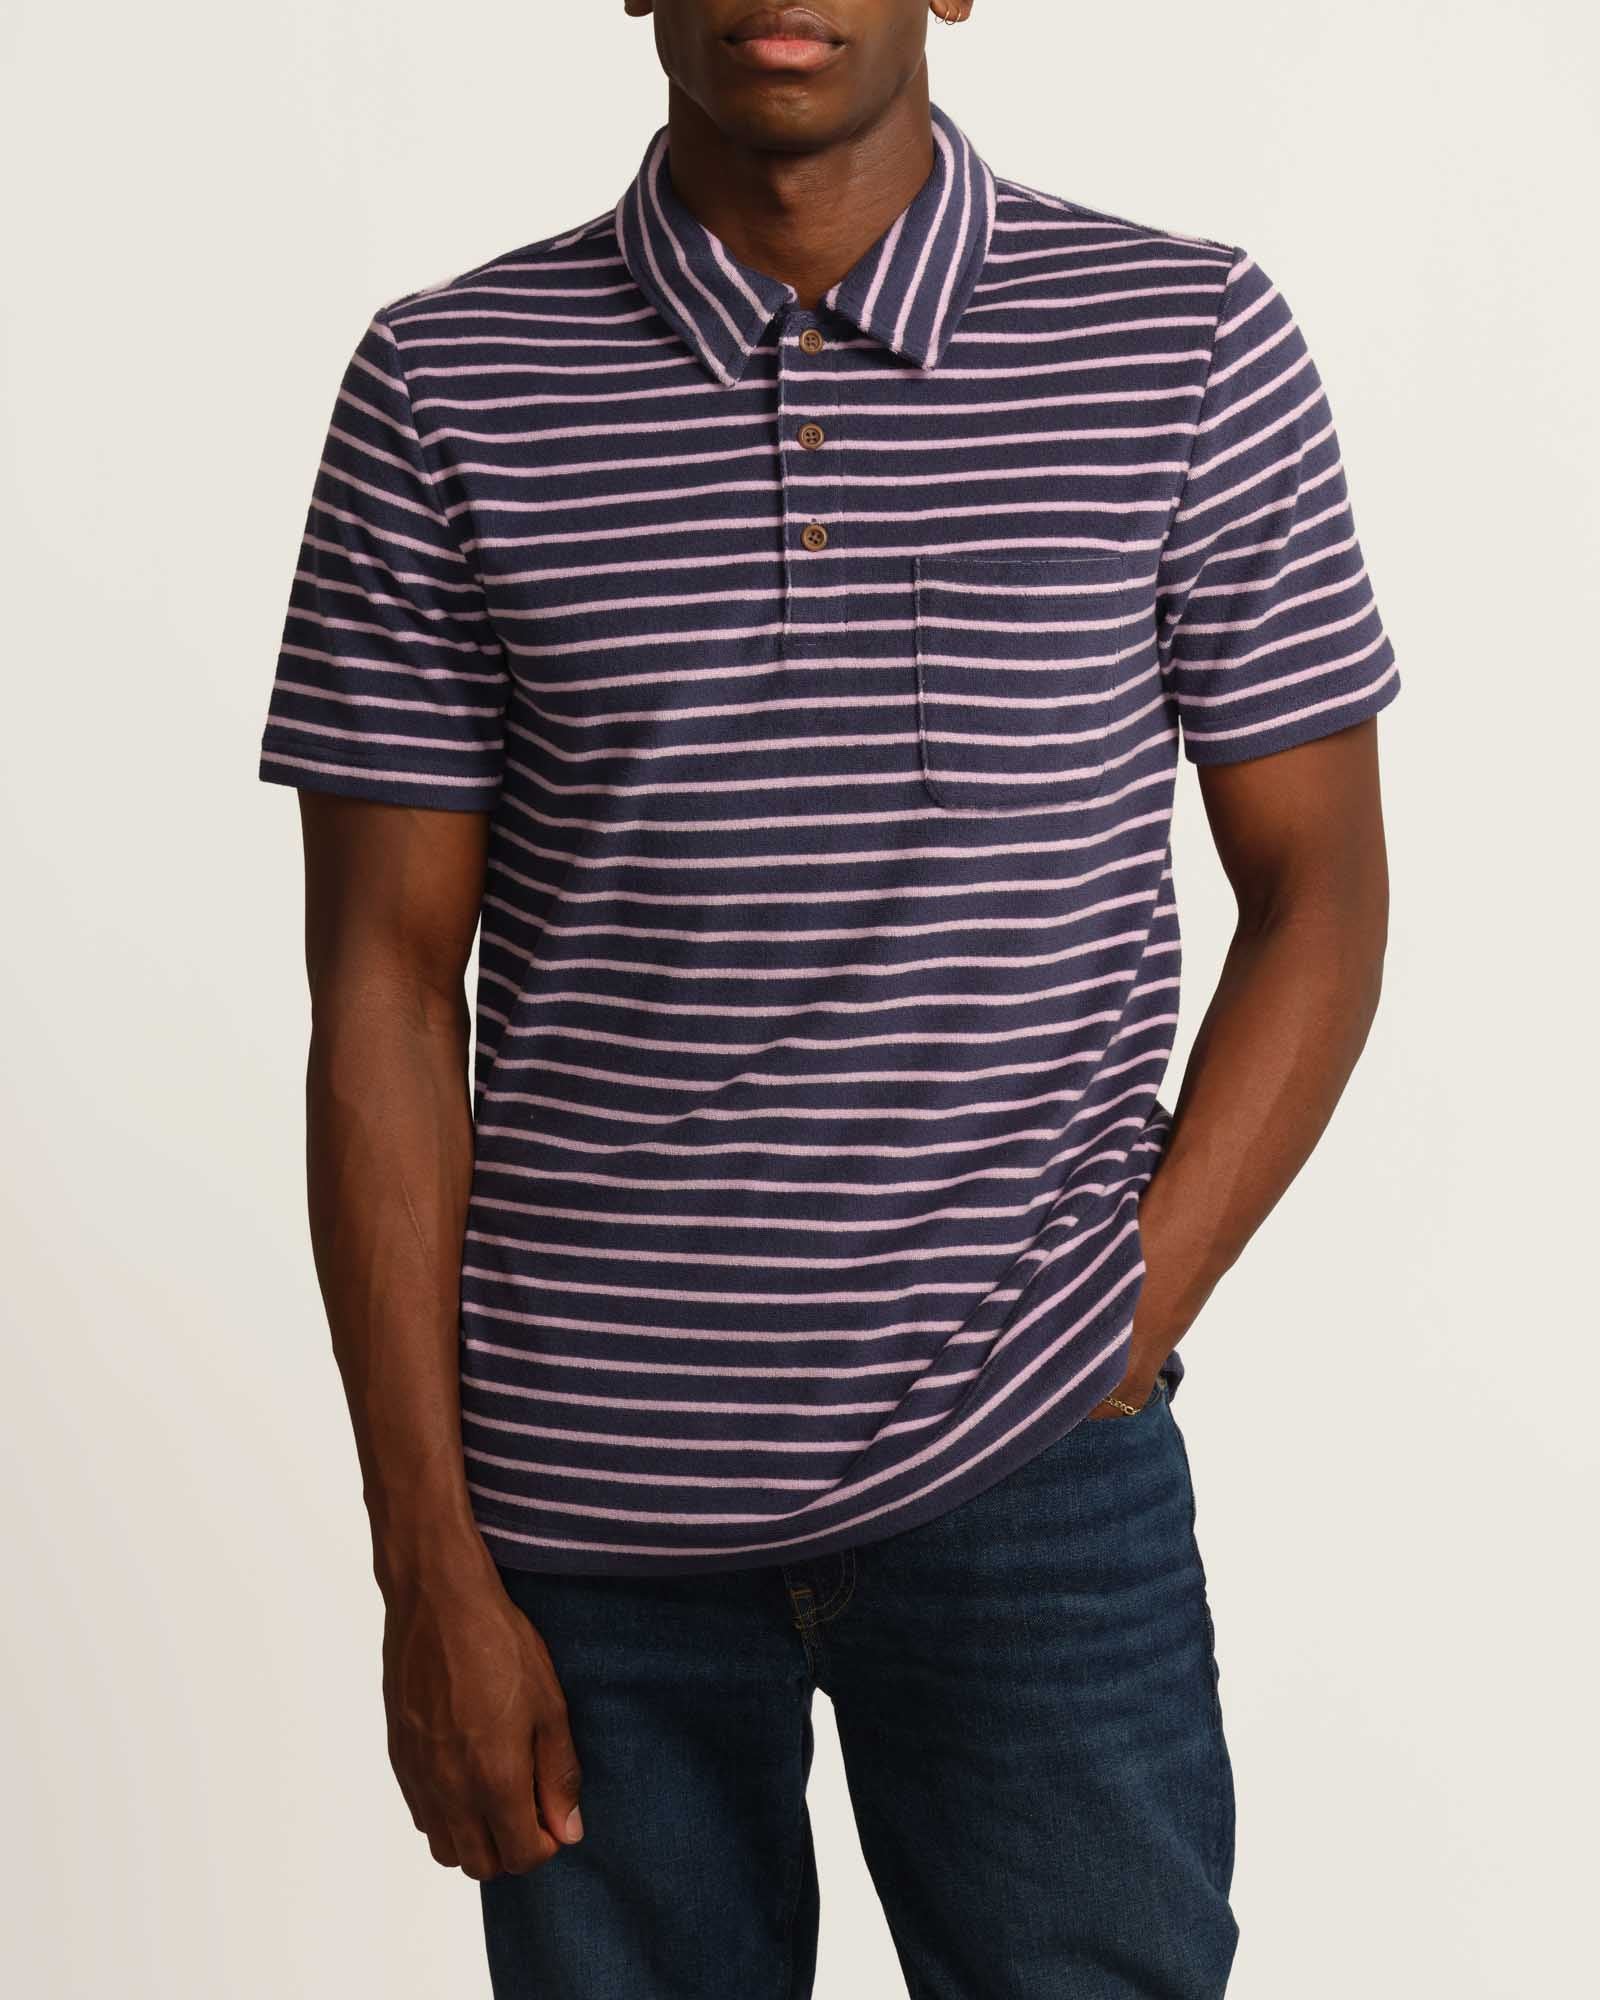 Magaschoni Men's French Terry Striped Polo Shirt | JANE + MERCER